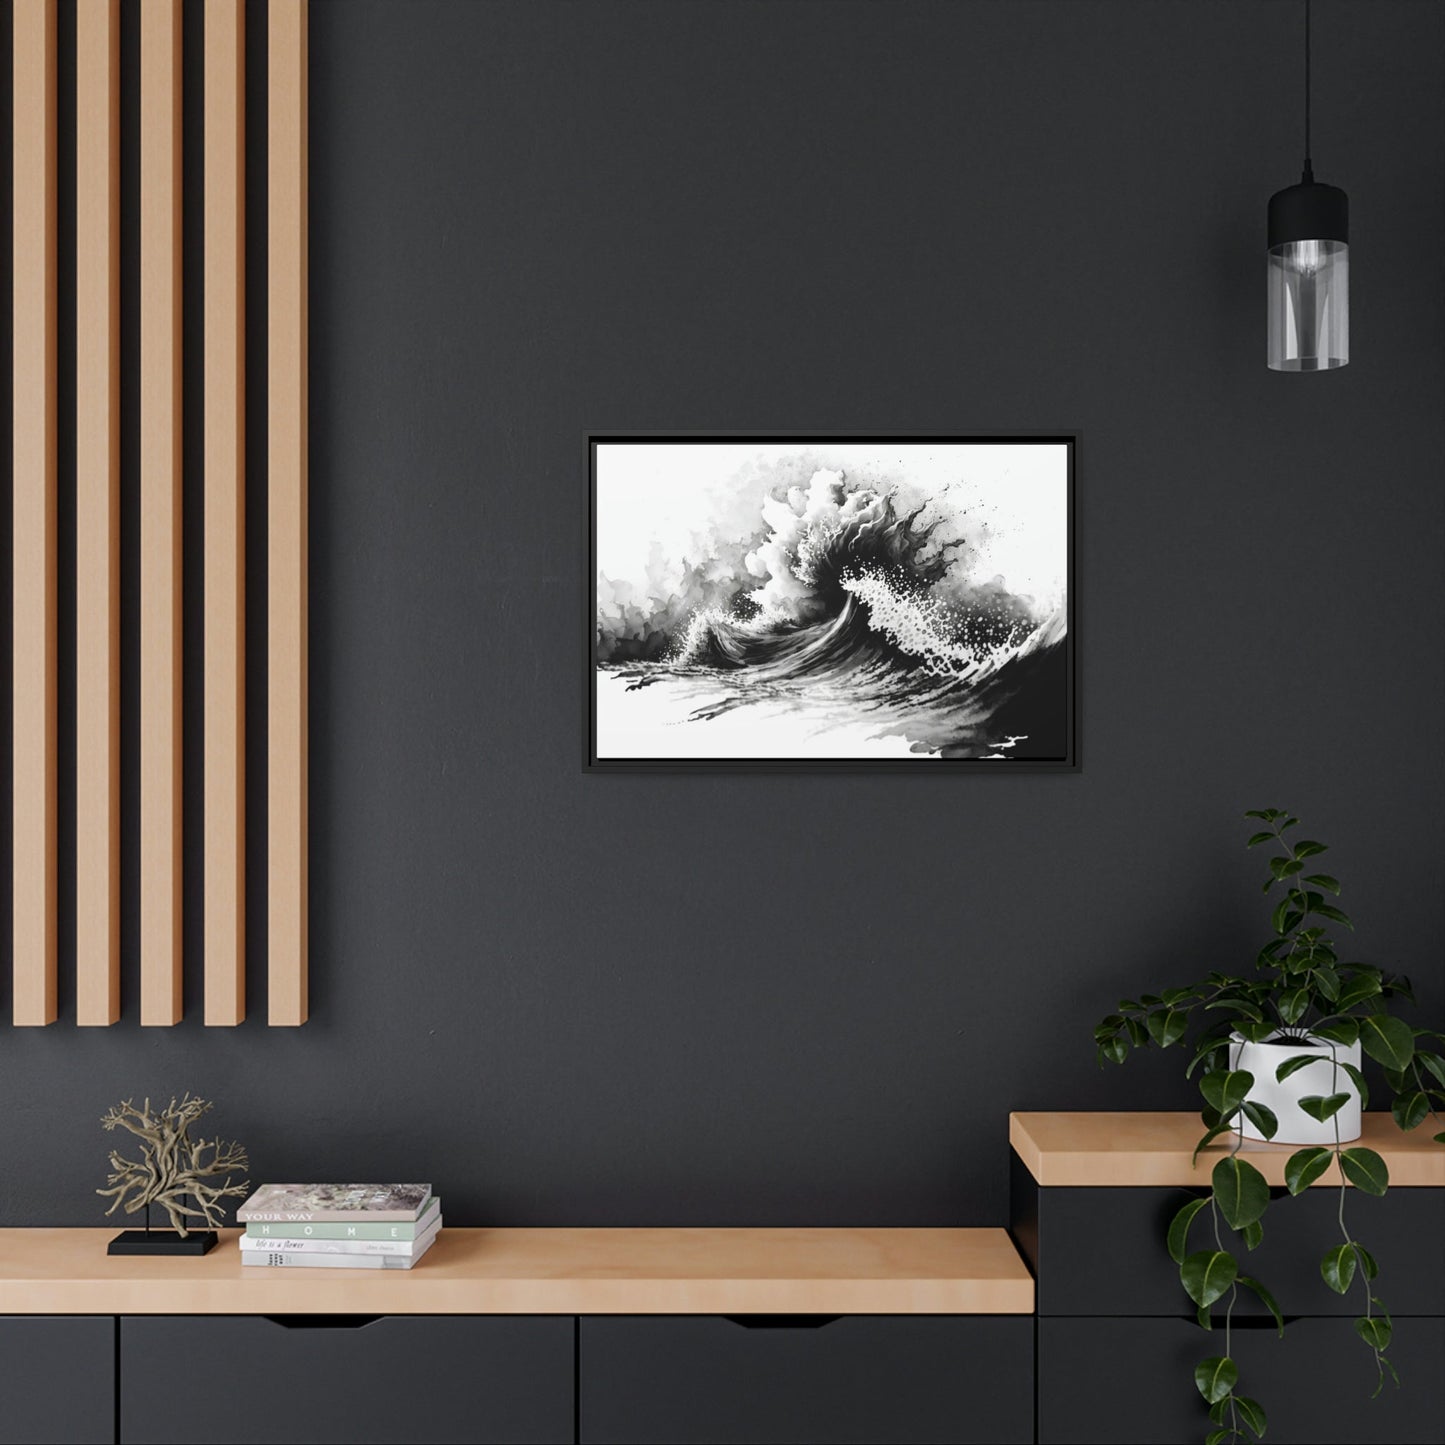 The Beauty of Contrast: Black and White Art on Framed Canvas